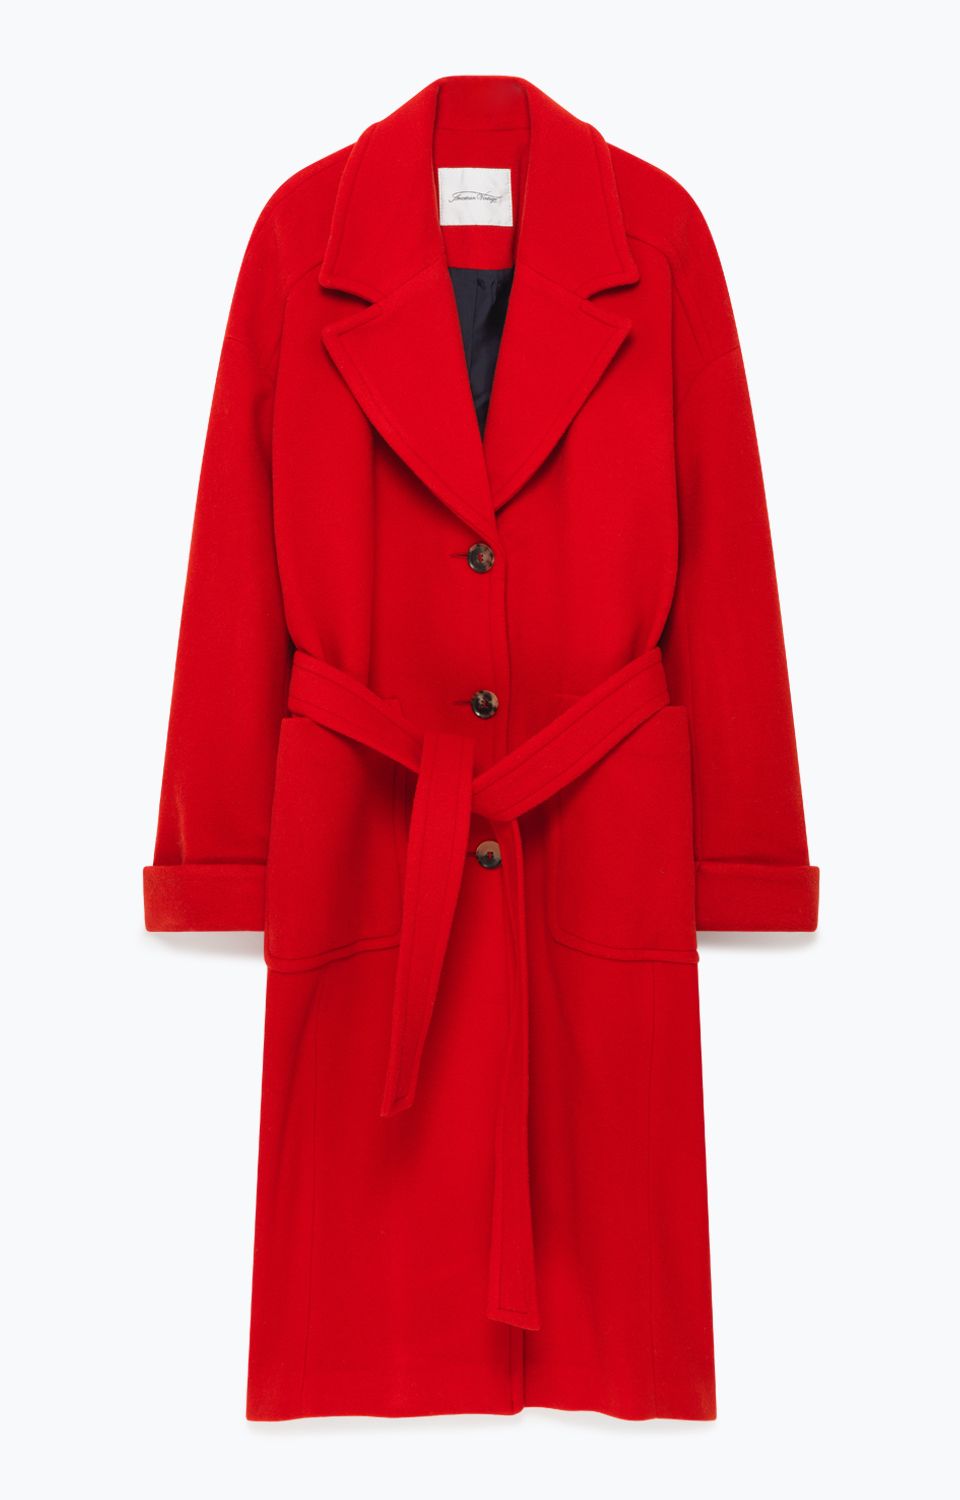 Clothing, Outerwear, Coat, Red, Sleeve, Overcoat, Trench coat, Collar, Robe, Jacket, 